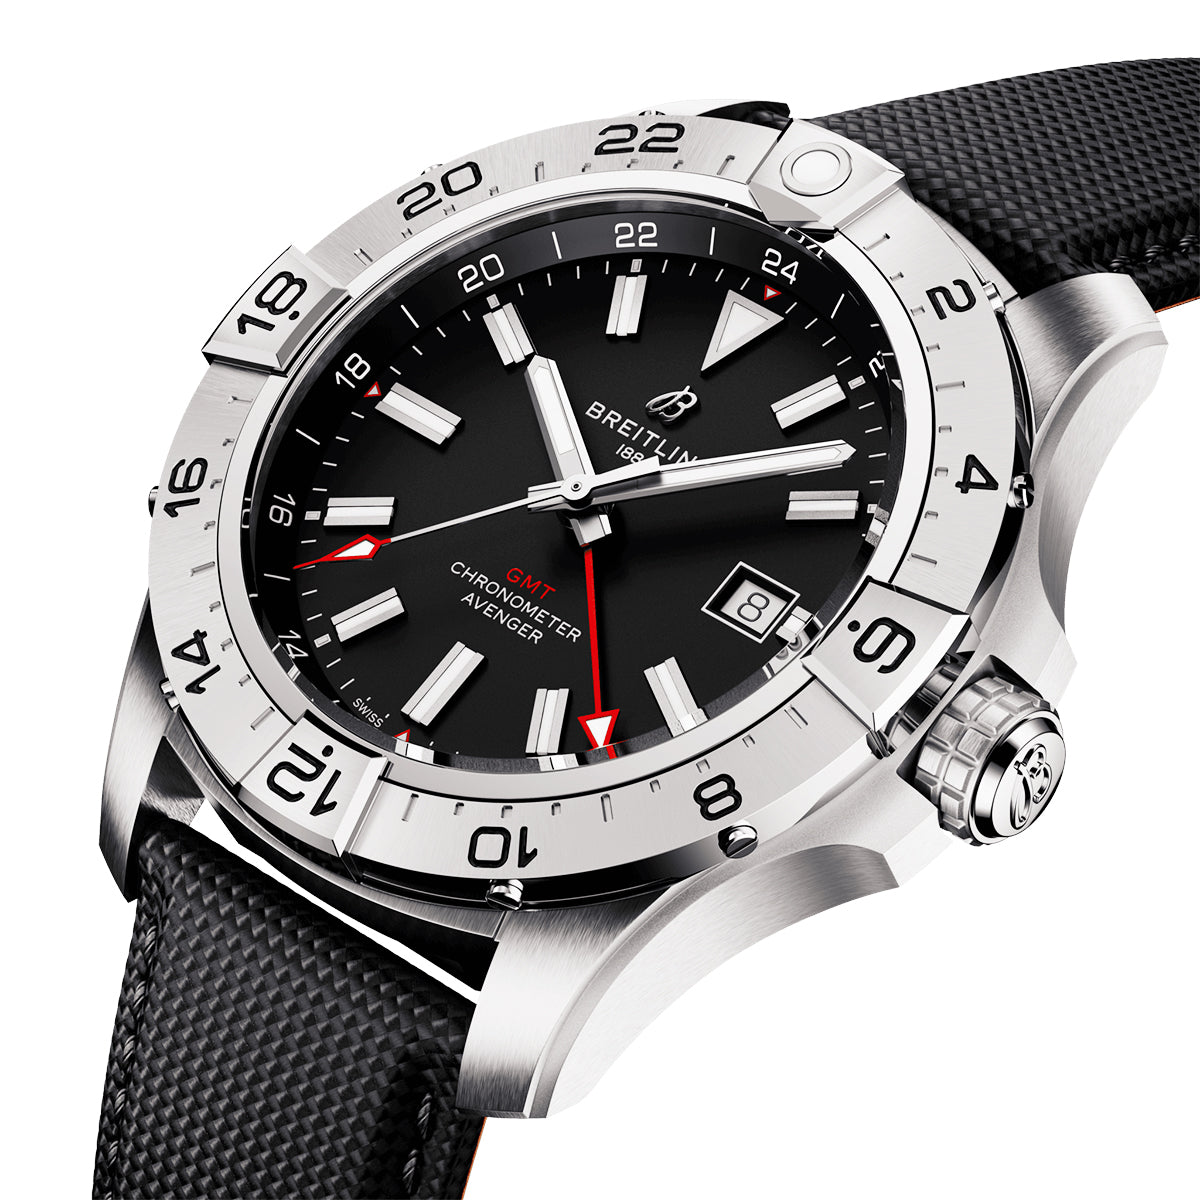 Avenger GMT 44mm Black Dial Automatic Strap Watch